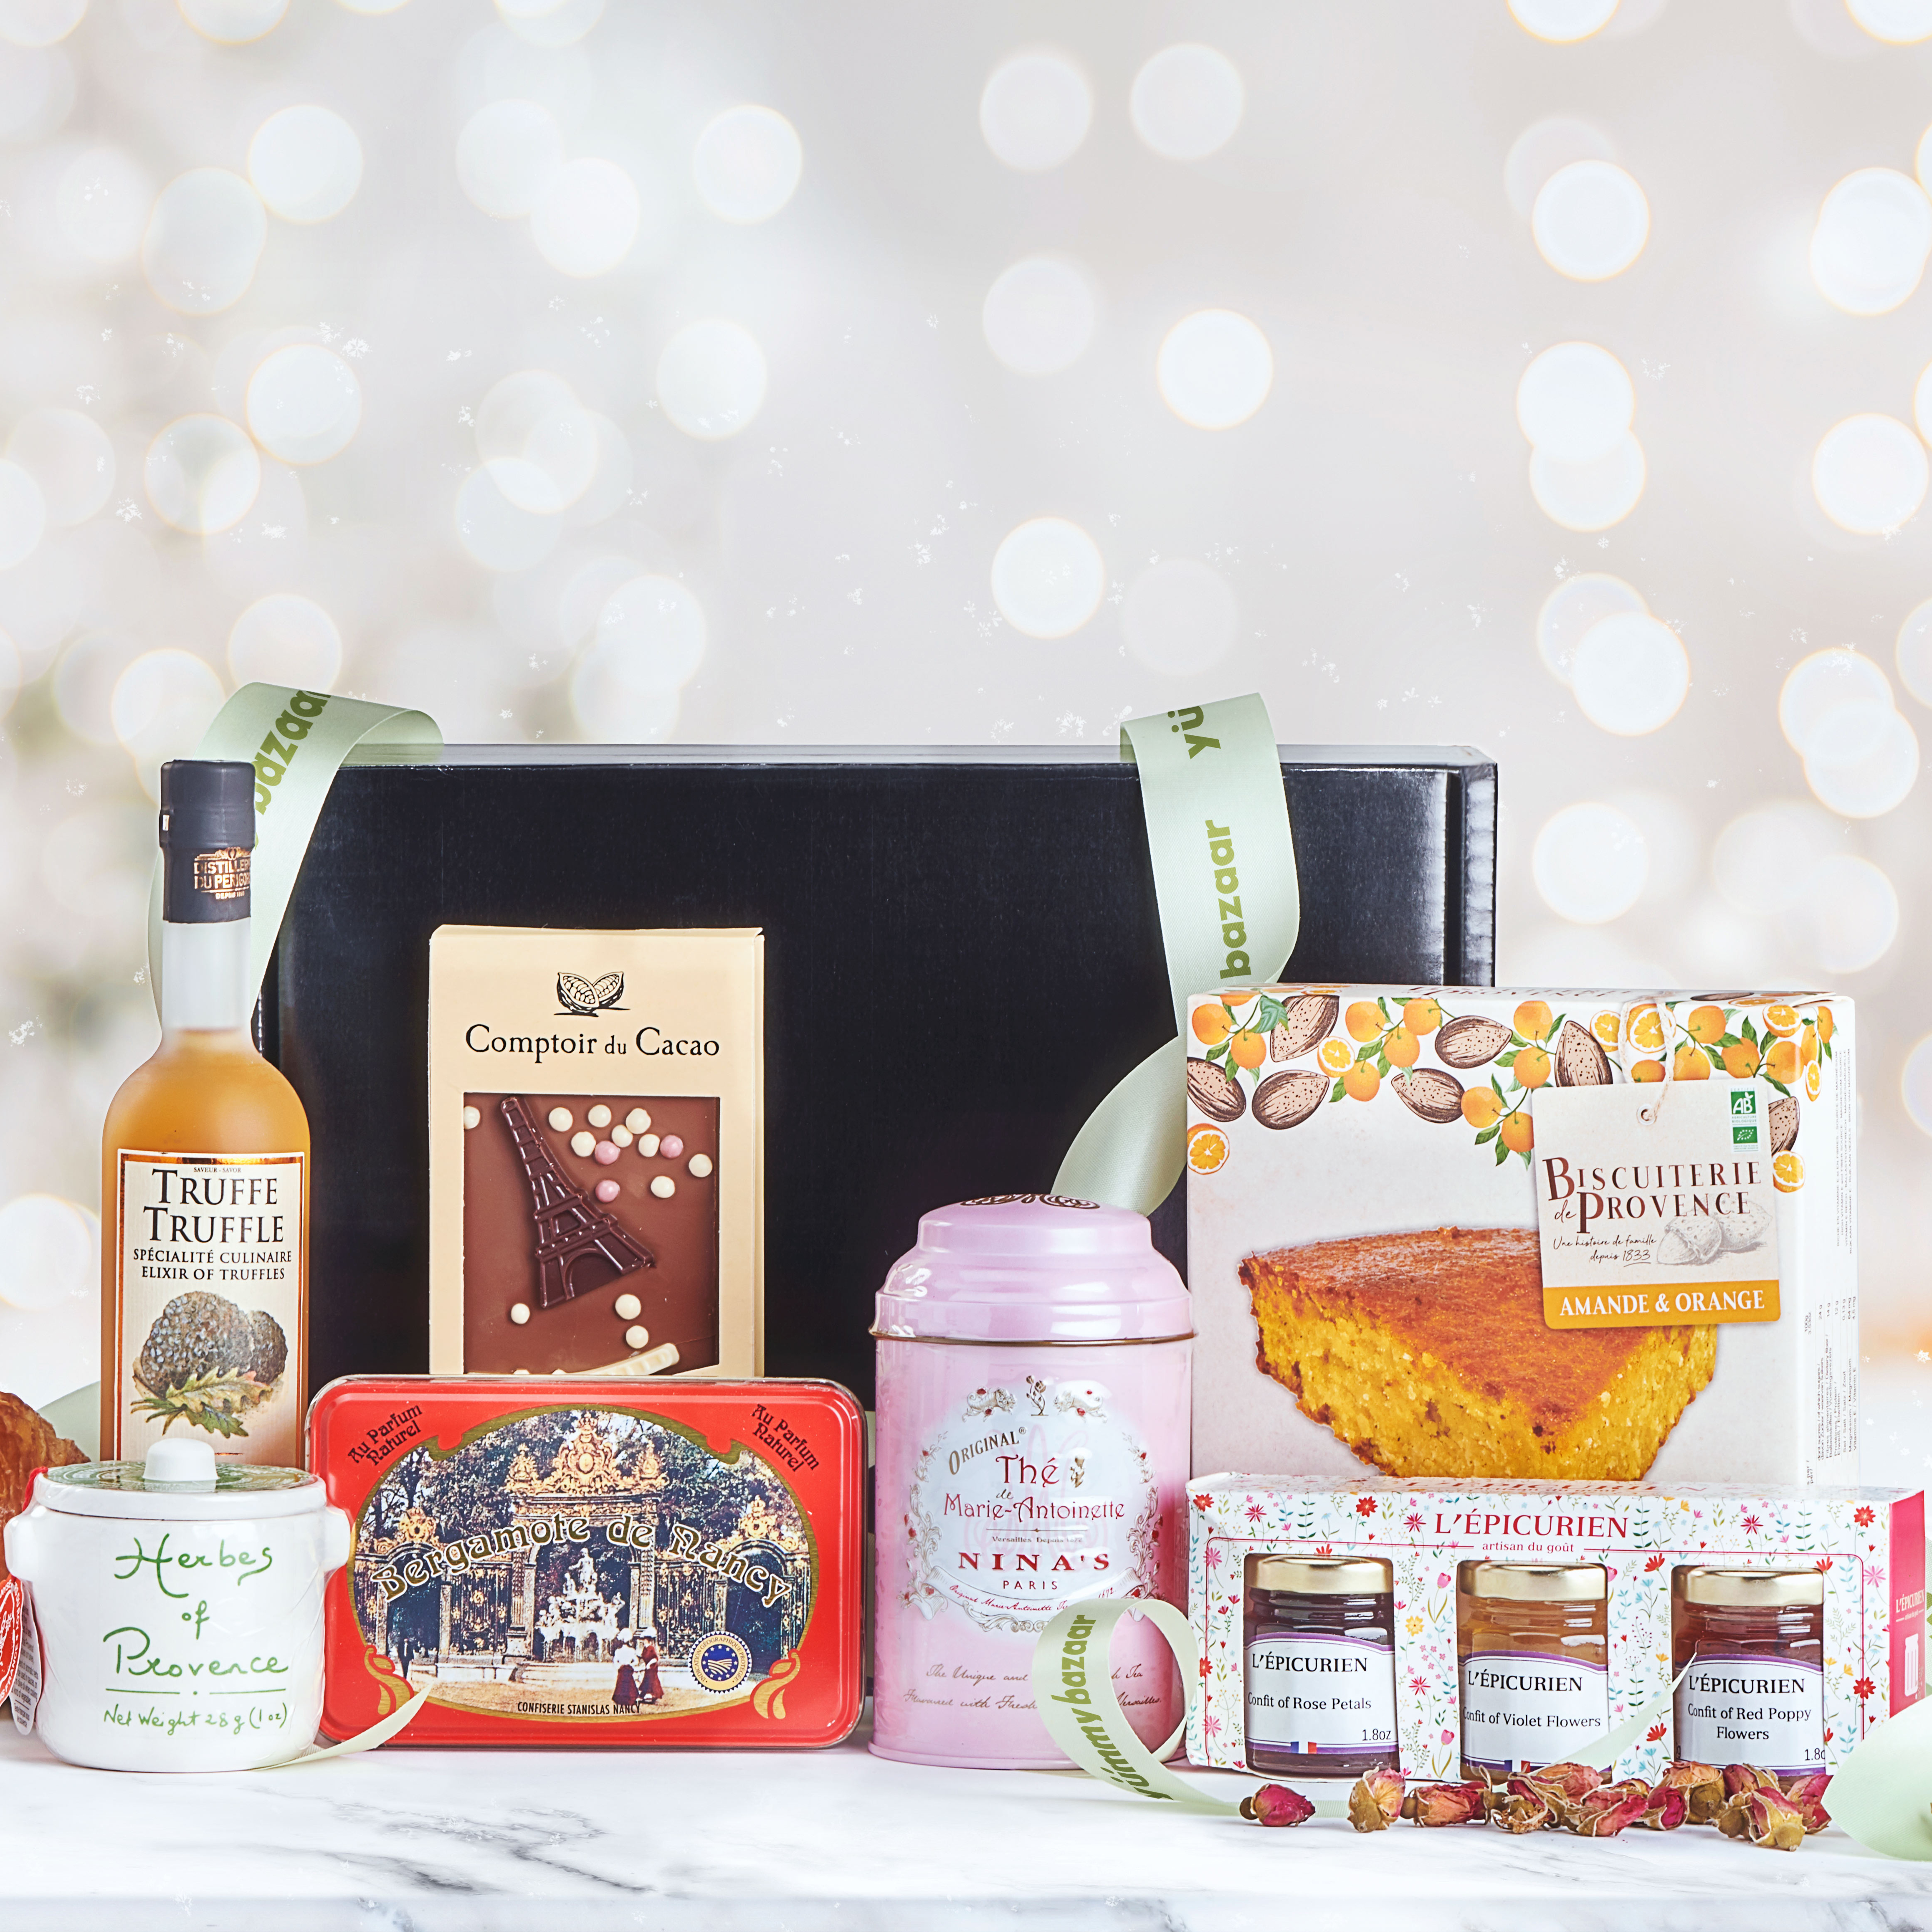 Yummy Bazaar: Get Free Sampler Box with Any New Subscription Box Purchase